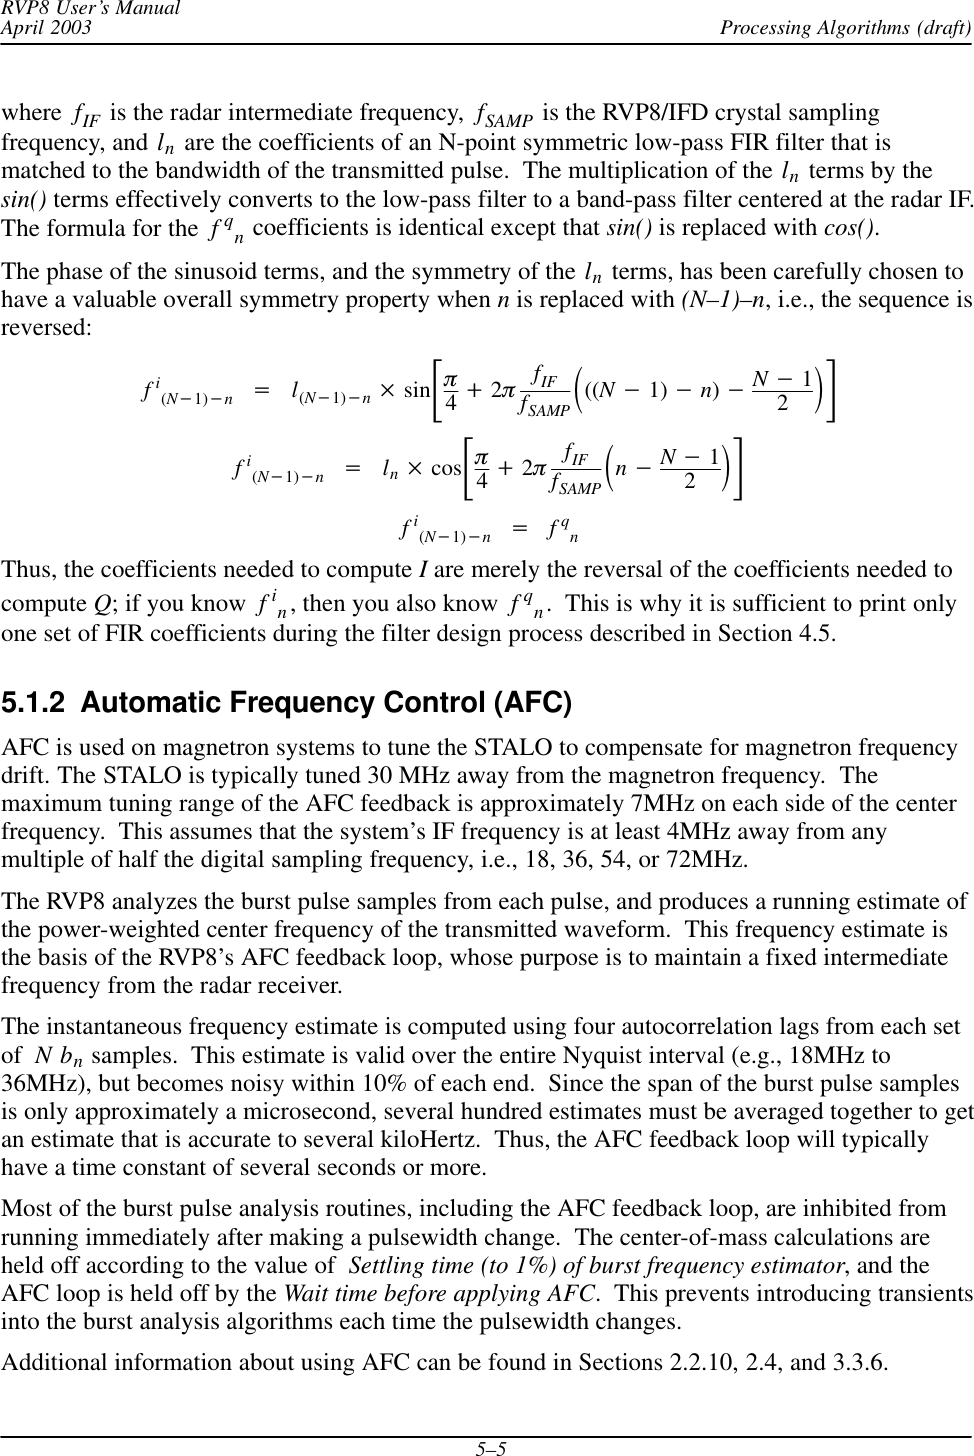 Processing Algorithms (draft)RVP8 User’s ManualApril 20035–5where fIF  is the radar intermediate frequency,  fSAMP  is the RVP8/IFD crystal samplingfrequency, and ln are the coefficients of an N-point symmetric low-pass FIR filter that ismatched to the bandwidth of the transmitted pulse.  The multiplication of the ln terms by thesin() terms effectively converts to the low-pass filter to a band-pass filter centered at the radar IF.The formula for the  fqn coefficients is identical except that sin() is replaced with cos().The phase of the sinusoid terms, and the symmetry of the ln terms, has been carefully chosen tohave a valuable overall symmetry property when n is replaced with (N–1)–n, i.e., the sequence isreversed:fi(N*1)*n+l(N*1)*n sinƪp4)2pfIFfSAMP ǒ((N*1) *n)*N*12Ǔƫfi(N*1)*n+ln cosƪp4)2pfIFfSAMP ǒn*N*12Ǔƫfi(N*1)*n+fqnThus, the coefficients needed to compute I are merely the reversal of the coefficients needed tocompute Q; if you know  fin, then you also know  fqn.  This is why it is sufficient to print onlyone set of FIR coefficients during the filter design process described in Section 4.5.5.1.2  Automatic Frequency Control (AFC)AFC is used on magnetron systems to tune the STALO to compensate for magnetron frequencydrift. The STALO is typically tuned 30 MHz away from the magnetron frequency.  Themaximum tuning range of the AFC feedback is approximately 7MHz on each side of the centerfrequency.  This assumes that the system’s IF frequency is at least 4MHz away from anymultiple of half the digital sampling frequency, i.e., 18, 36, 54, or 72MHz.The RVP8 analyzes the burst pulse samples from each pulse, and produces a running estimate ofthe power-weighted center frequency of the transmitted waveform.  This frequency estimate isthe basis of the RVP8’s AFC feedback loop, whose purpose is to maintain a fixed intermediatefrequency from the radar receiver.The instantaneous frequency estimate is computed using four autocorrelation lags from each setof Nbn samples.  This estimate is valid over the entire Nyquist interval (e.g., 18MHz to36MHz), but becomes noisy within 10% of each end.  Since the span of the burst pulse samplesis only approximately a microsecond, several hundred estimates must be averaged together to getan estimate that is accurate to several kiloHertz.  Thus, the AFC feedback loop will typicallyhave a time constant of several seconds or more.Most of the burst pulse analysis routines, including the AFC feedback loop, are inhibited fromrunning immediately after making a pulsewidth change.  The center-of-mass calculations areheld off according to the value of  Settling time (to 1%) of burst frequency estimator, and theAFC loop is held off by the Wait time before applying AFC.  This prevents introducing transientsinto the burst analysis algorithms each time the pulsewidth changes.Additional information about using AFC can be found in Sections 2.2.10, 2.4, and 3.3.6.